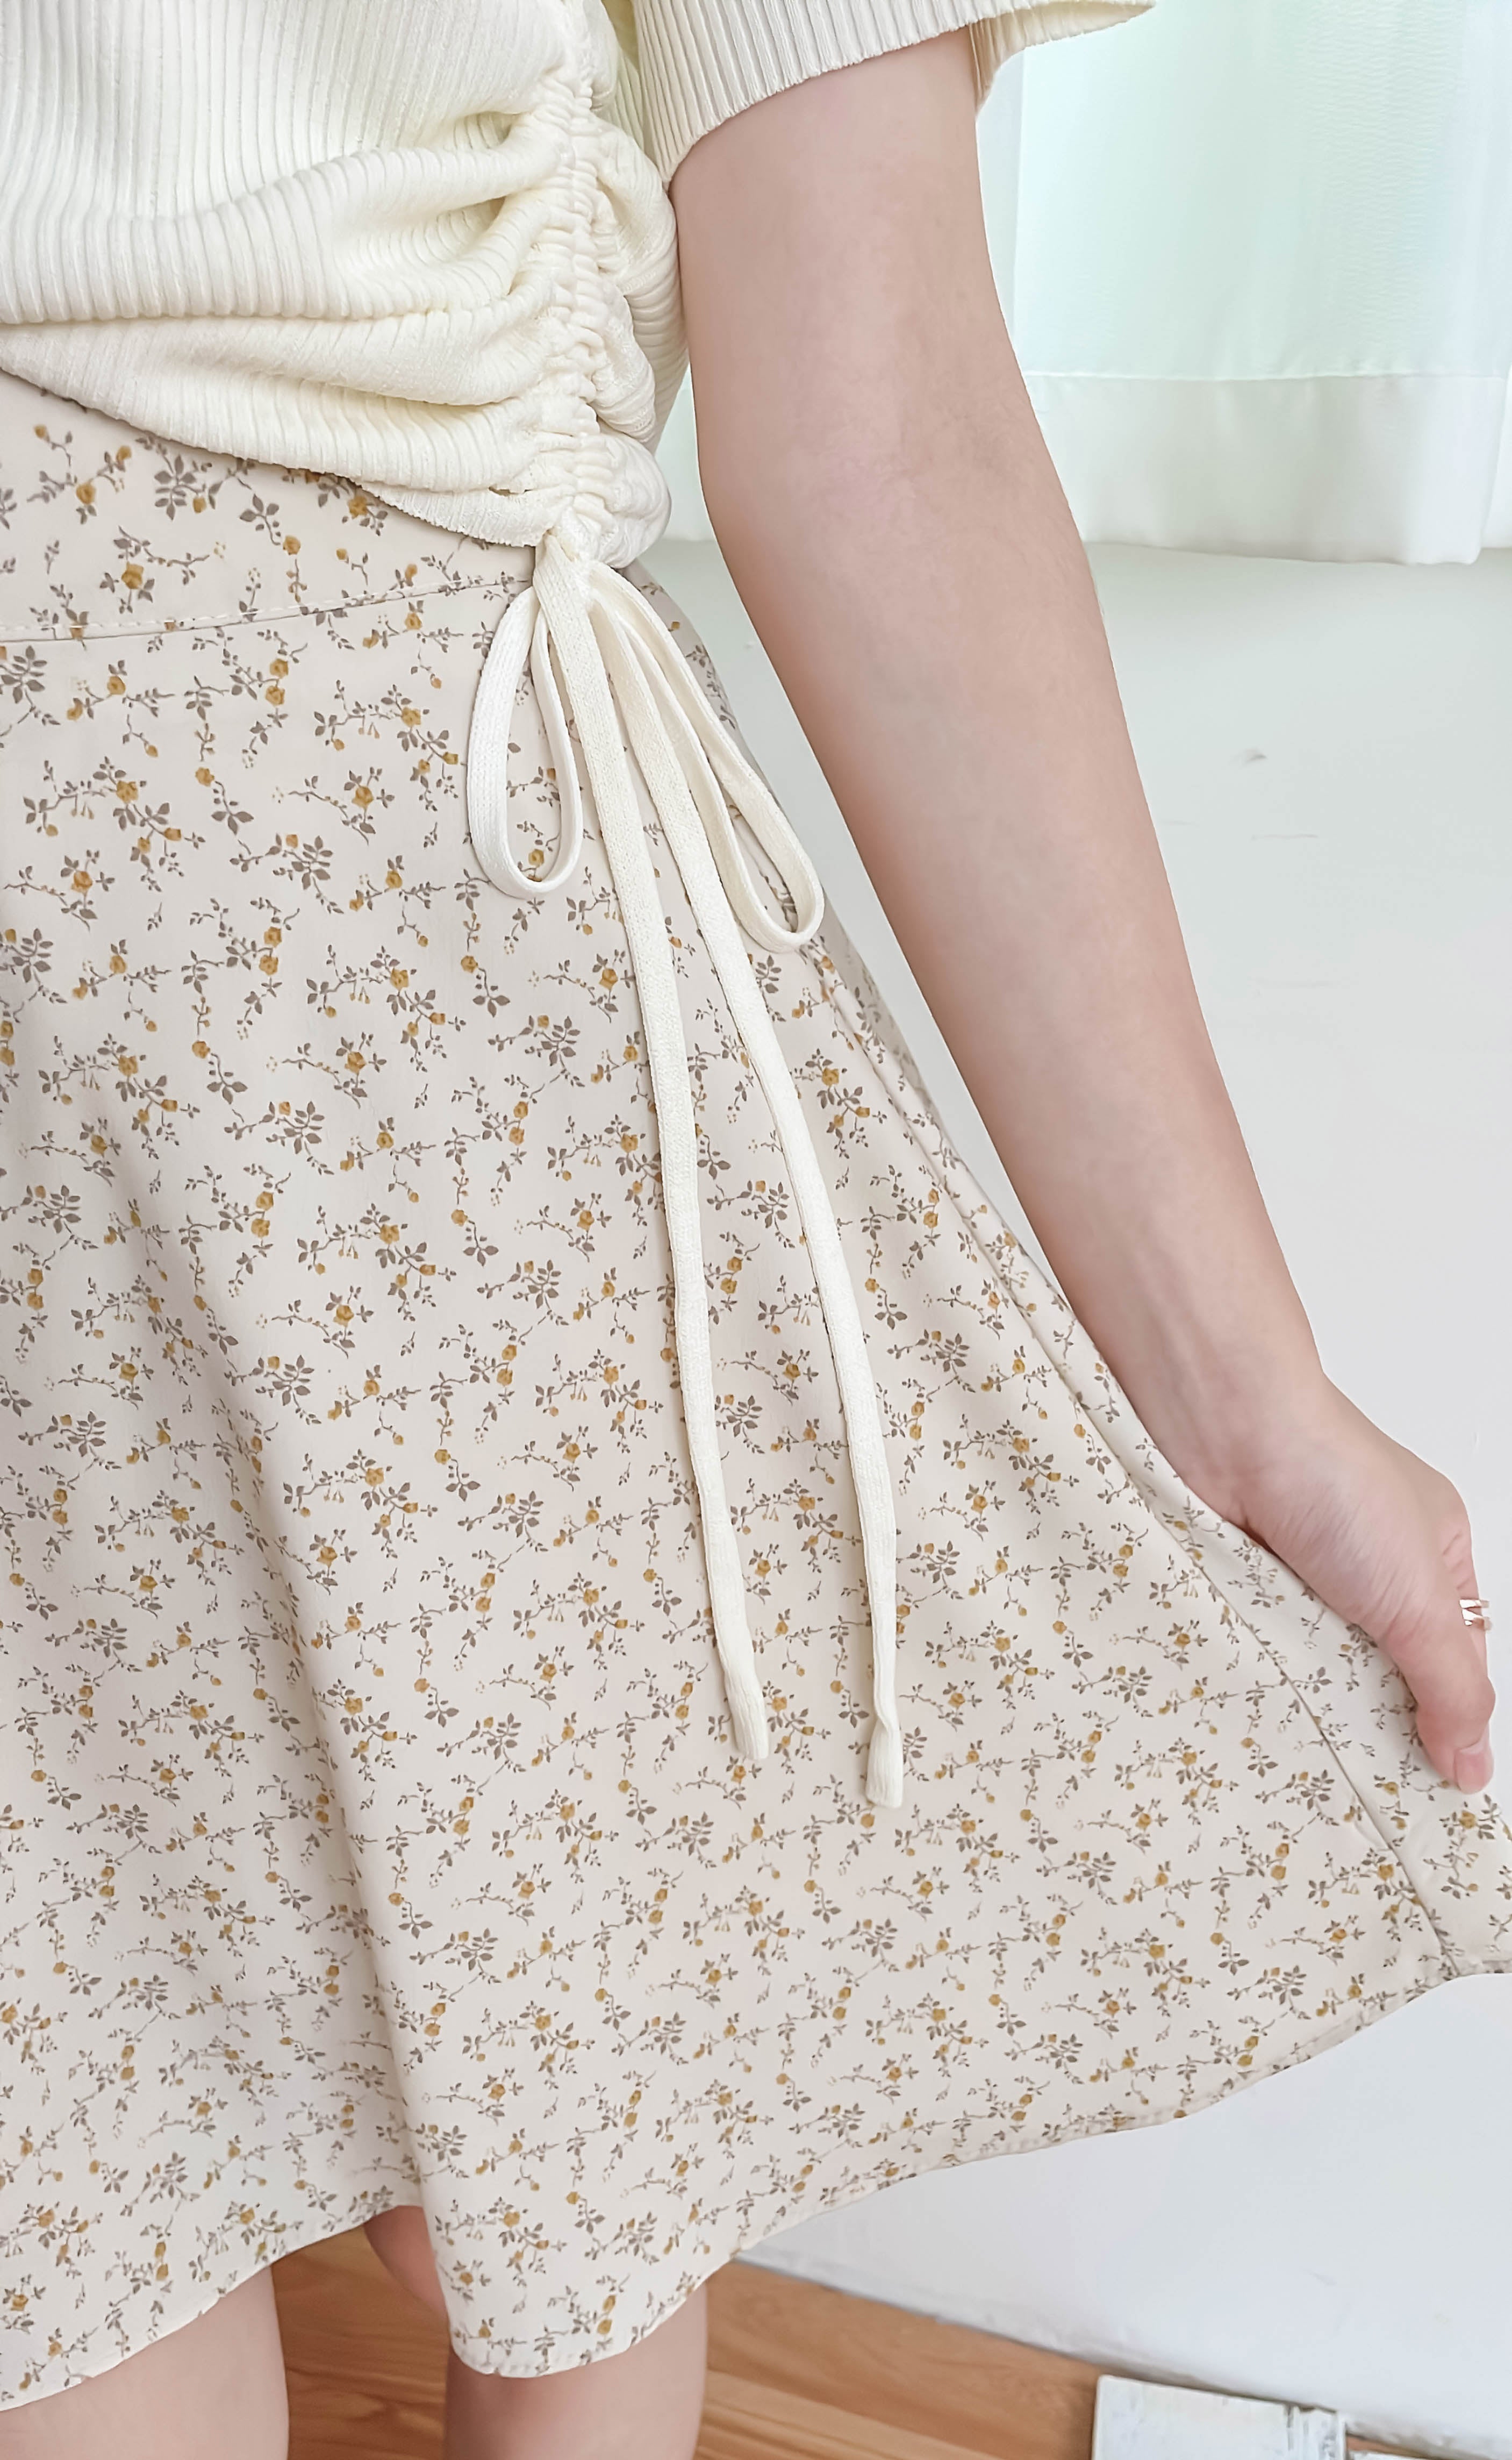 Garden 清雅花枝防走光百搭防皺花裙, Skirt/ SK8726 (Ivory sold out)